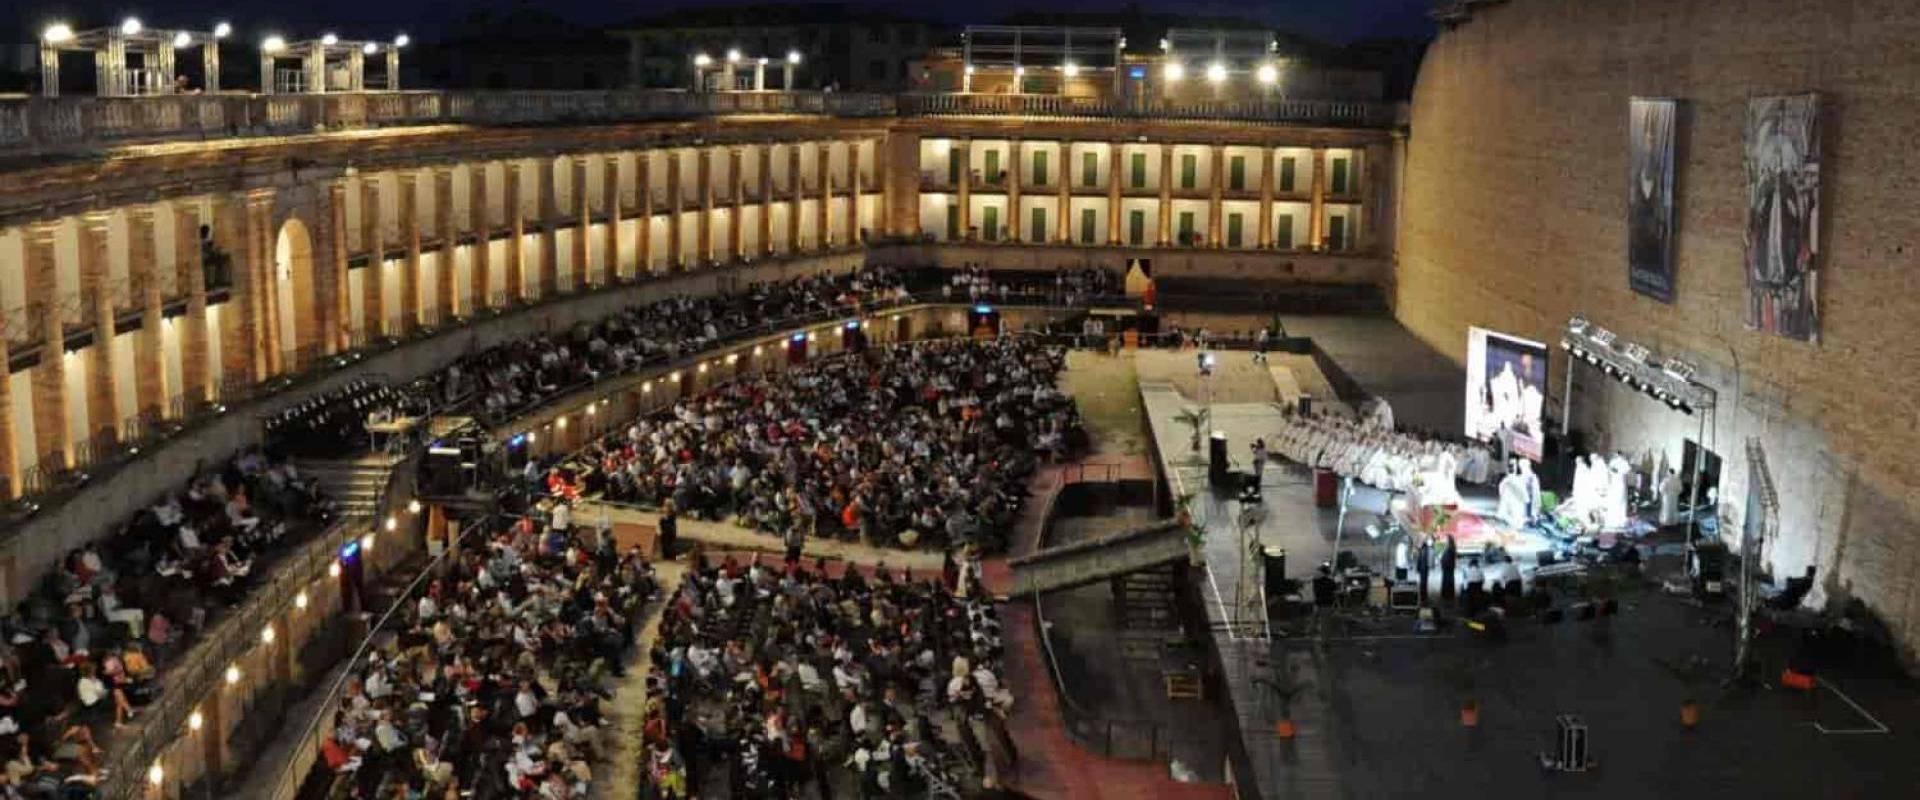 Opera Summer Festivals:<br> emotions under the stars with <br>the best events in Italy and Europe